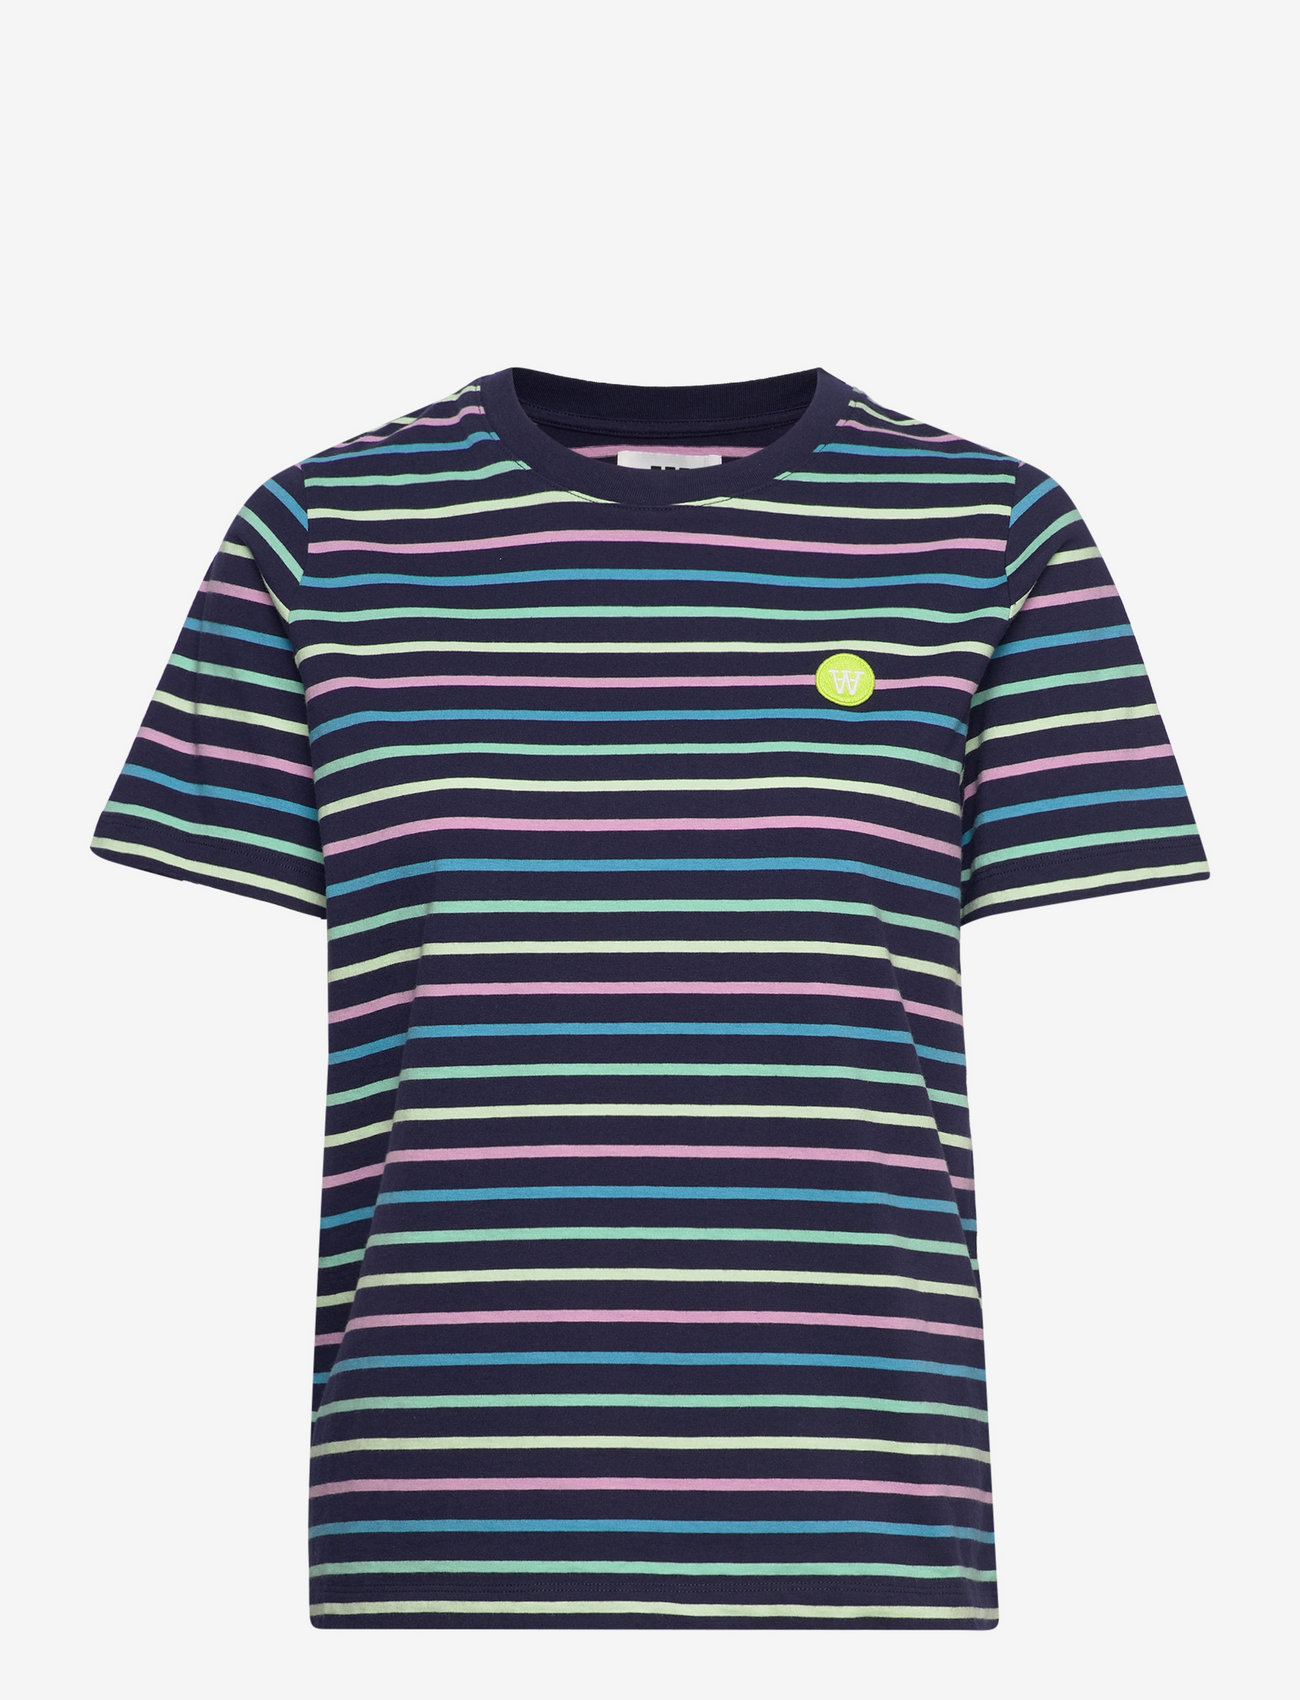 Double A by Wood Wood - Mia stripe T-shirt - t-shirts - navy stripes - 0